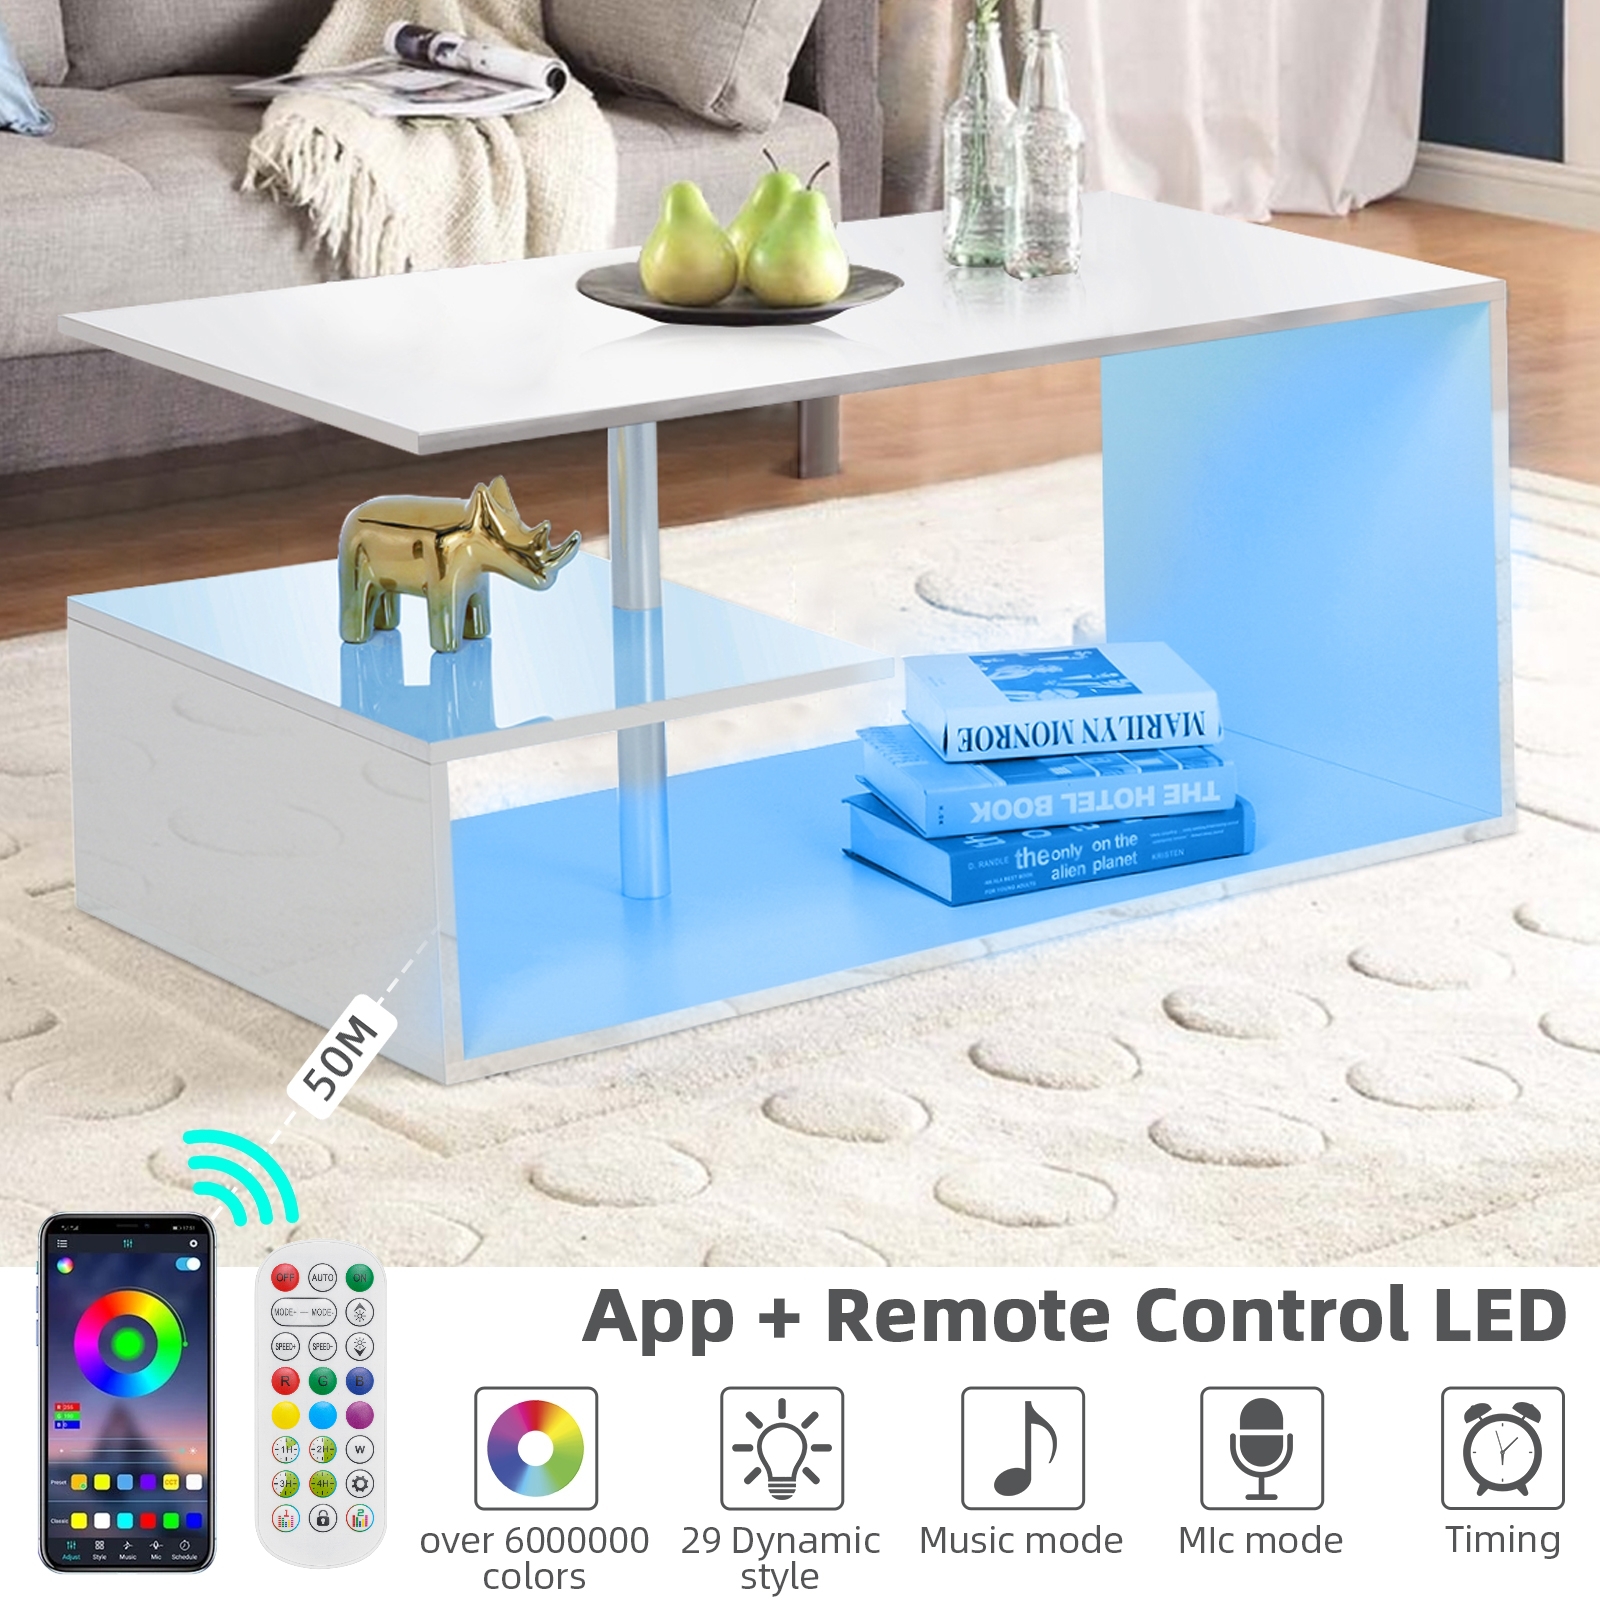 Hommpa High Gloss Coffee Table with Open Shelf LED Lights Smart APP Control White Center Sofa End Table S Shaped Modern Cocktail Tables with for Living Room - image 5 of 11